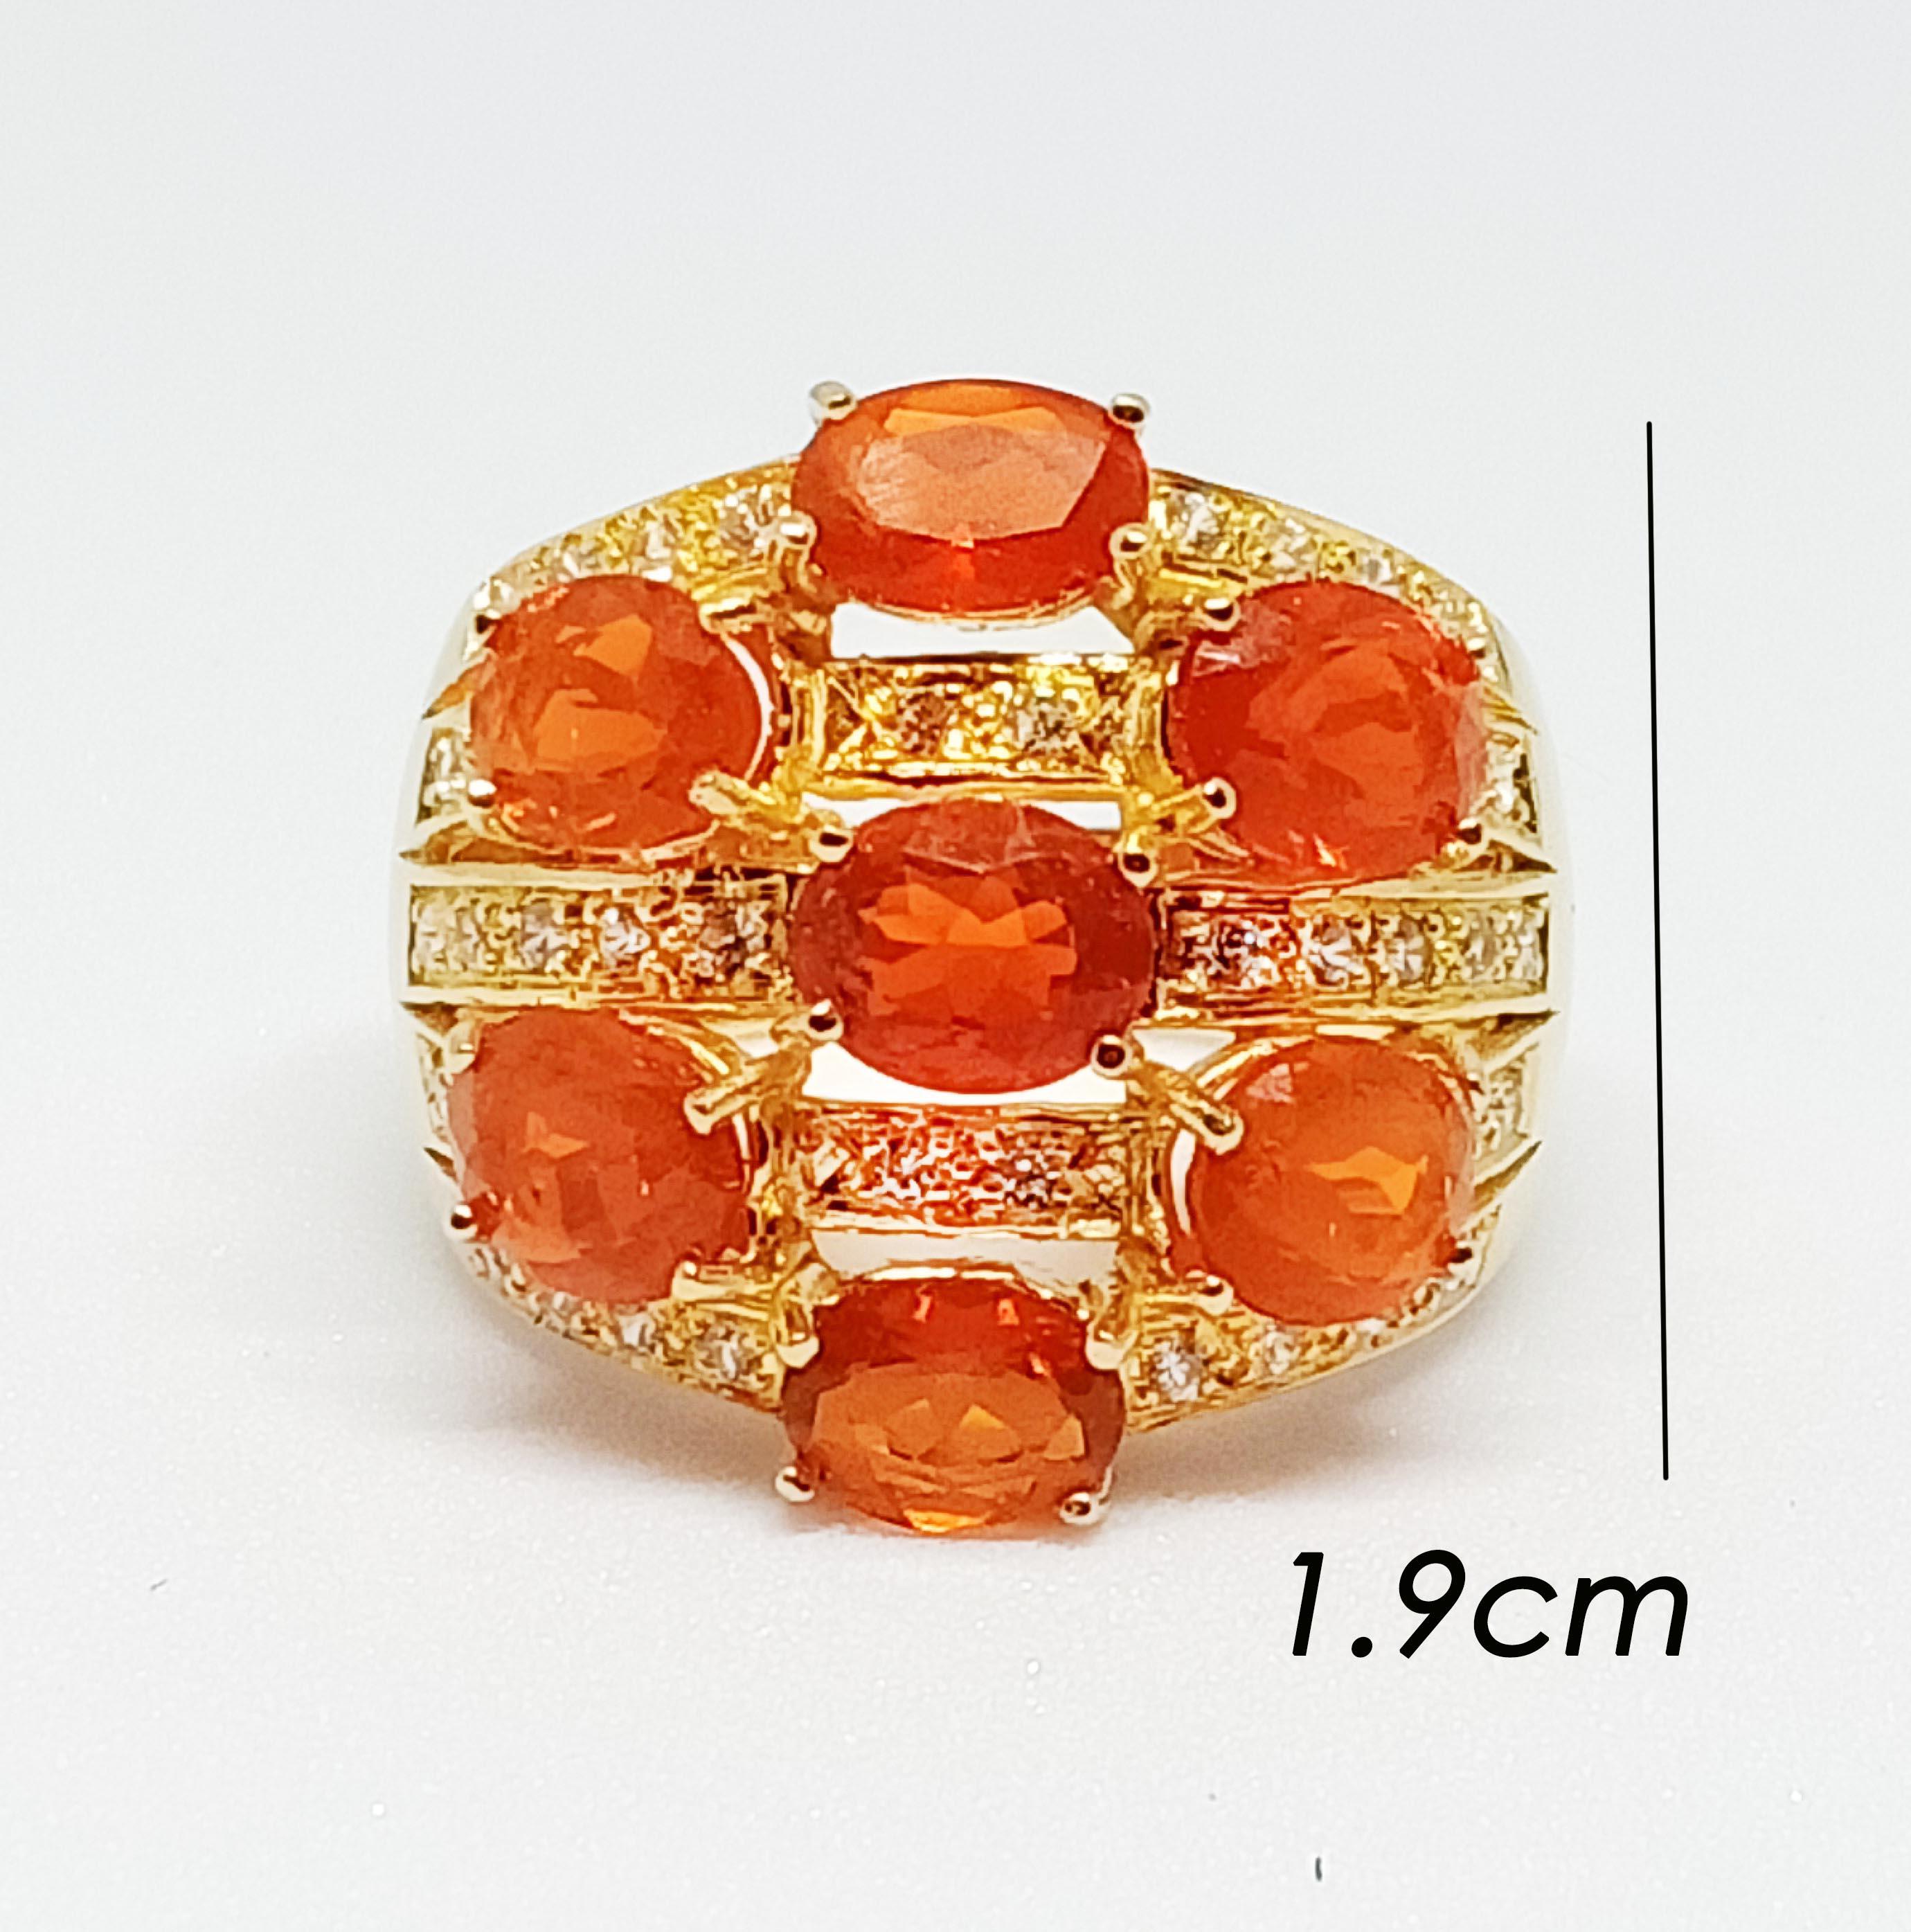 Mexican fire opal oval (3.38cts)  7 pcs.
white zircon round   1.25mm.  38 pcs.
18K gold plated over sterling silver
size 7.25 us.

Search ( stroefront , seller ) ornamento jewellery

